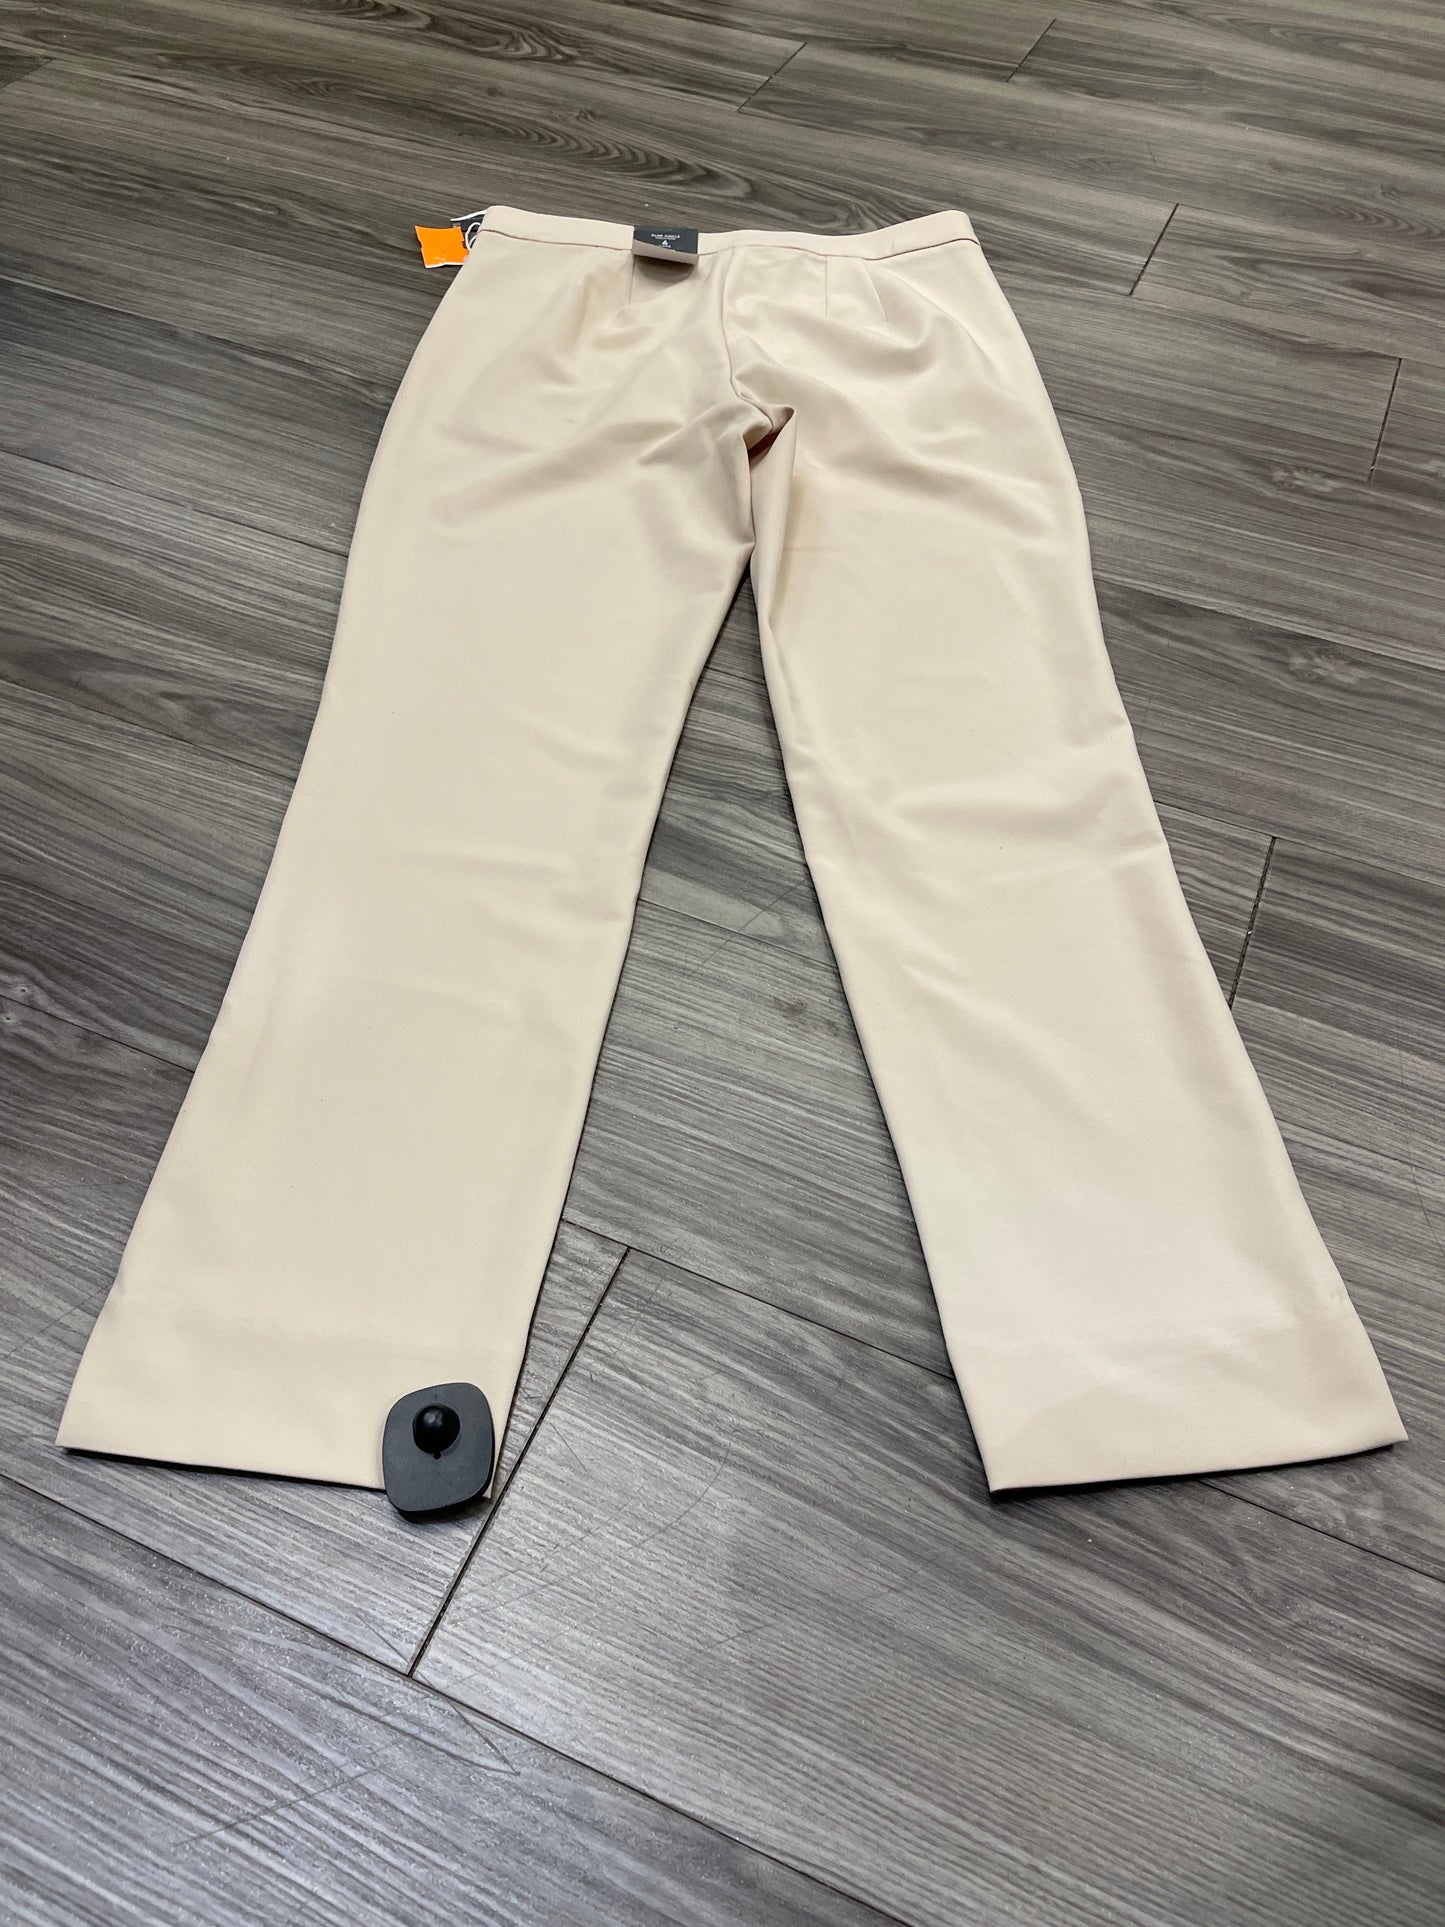 Pants Ankle By Worthington  Size: 4